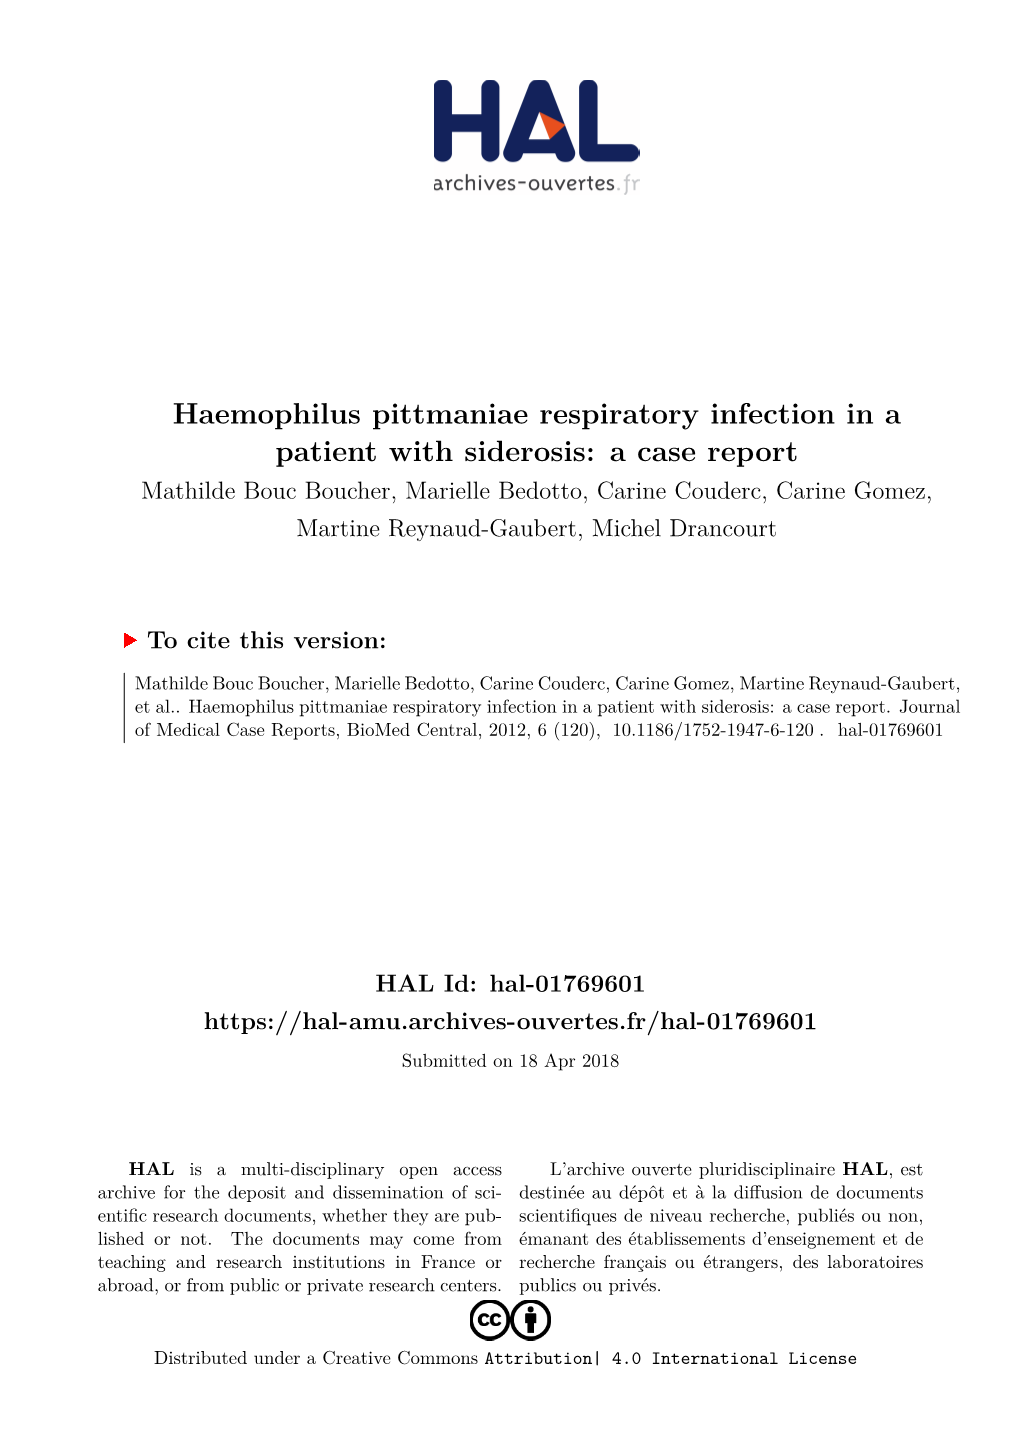 Haemophilus Pittmaniae Respiratory Infection in a Patient